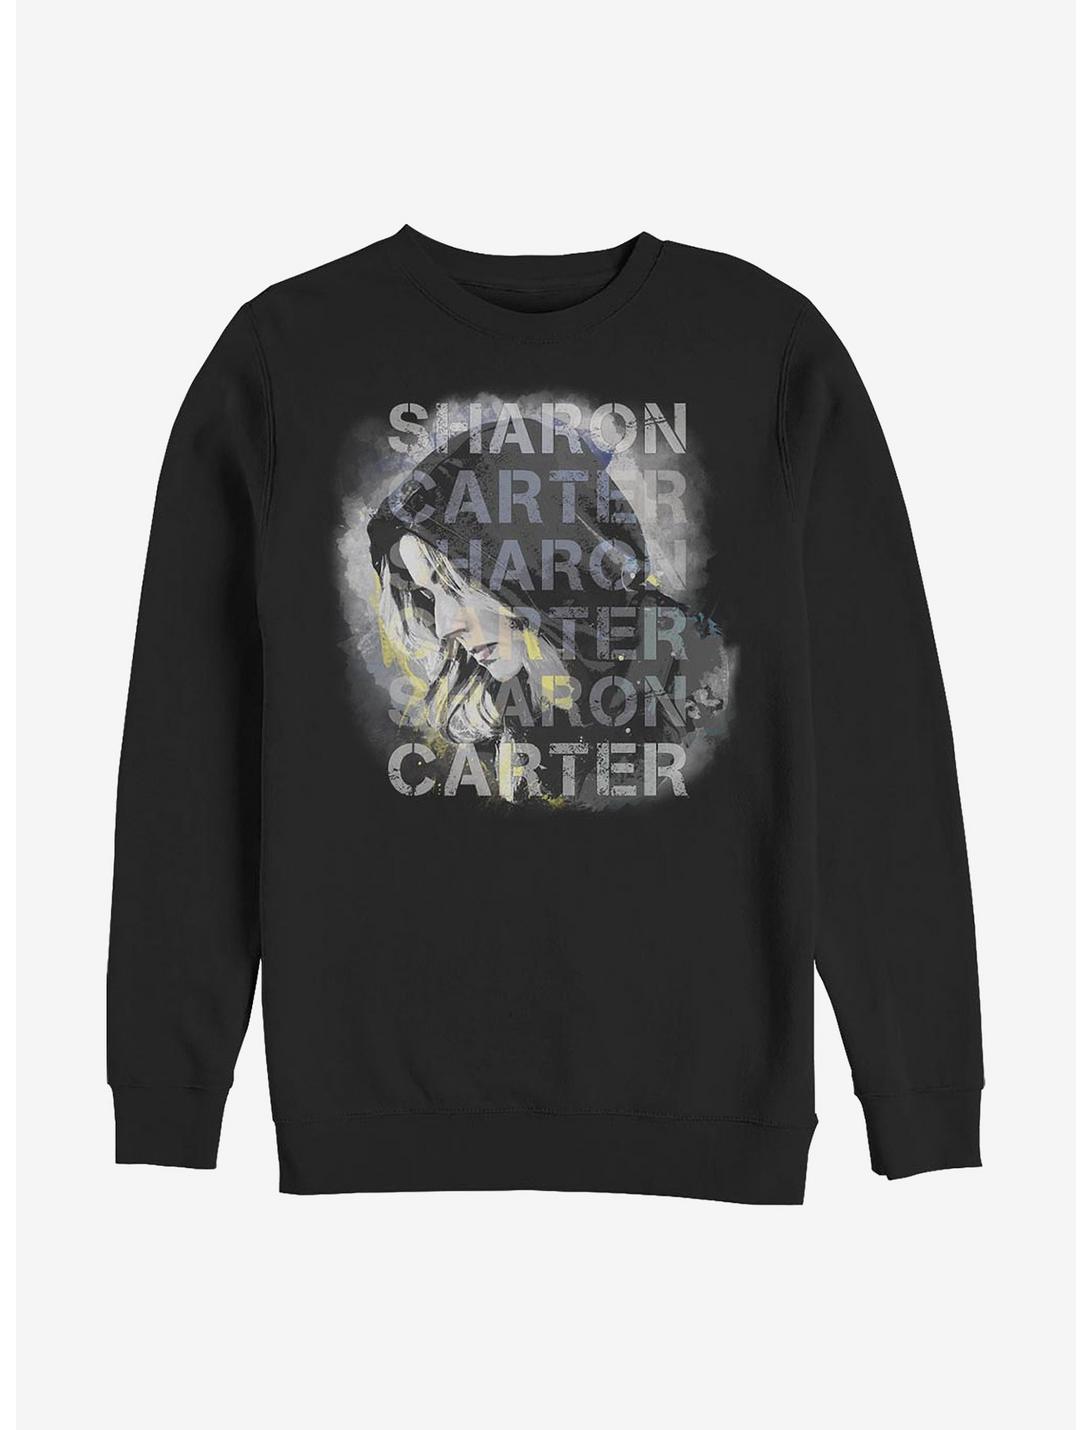 Marvel The Falcon And The Winter Soldier Carter Overlay Crew Sweatshirt, BLACK, hi-res